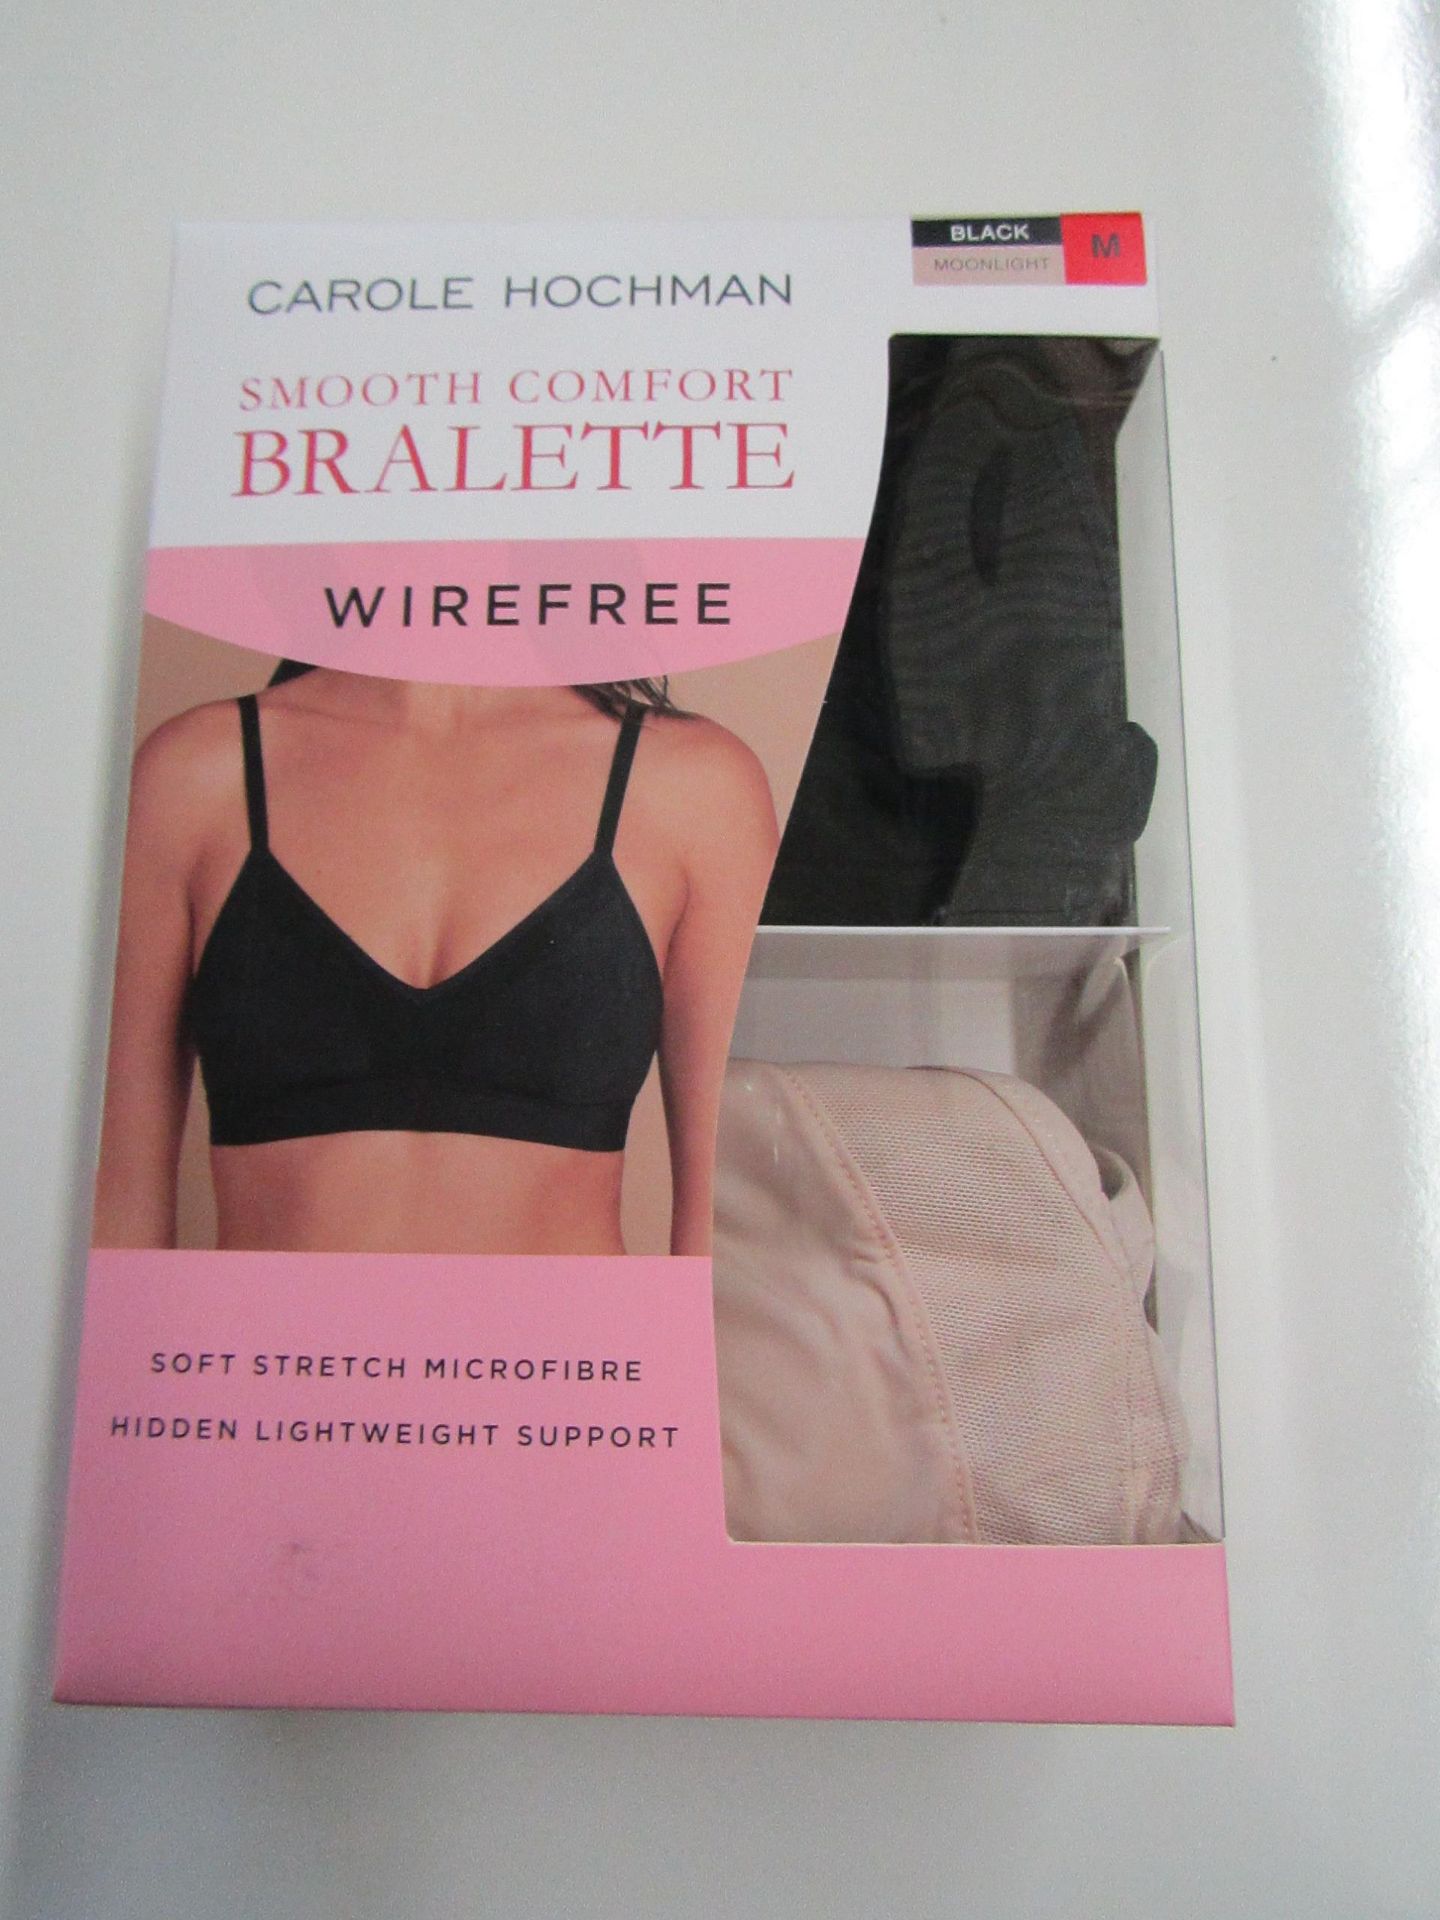 PK of 2 Carole Hochman Wirefree Bralette Size M New & Boxed (Picked at Randon So Colours Will Differ